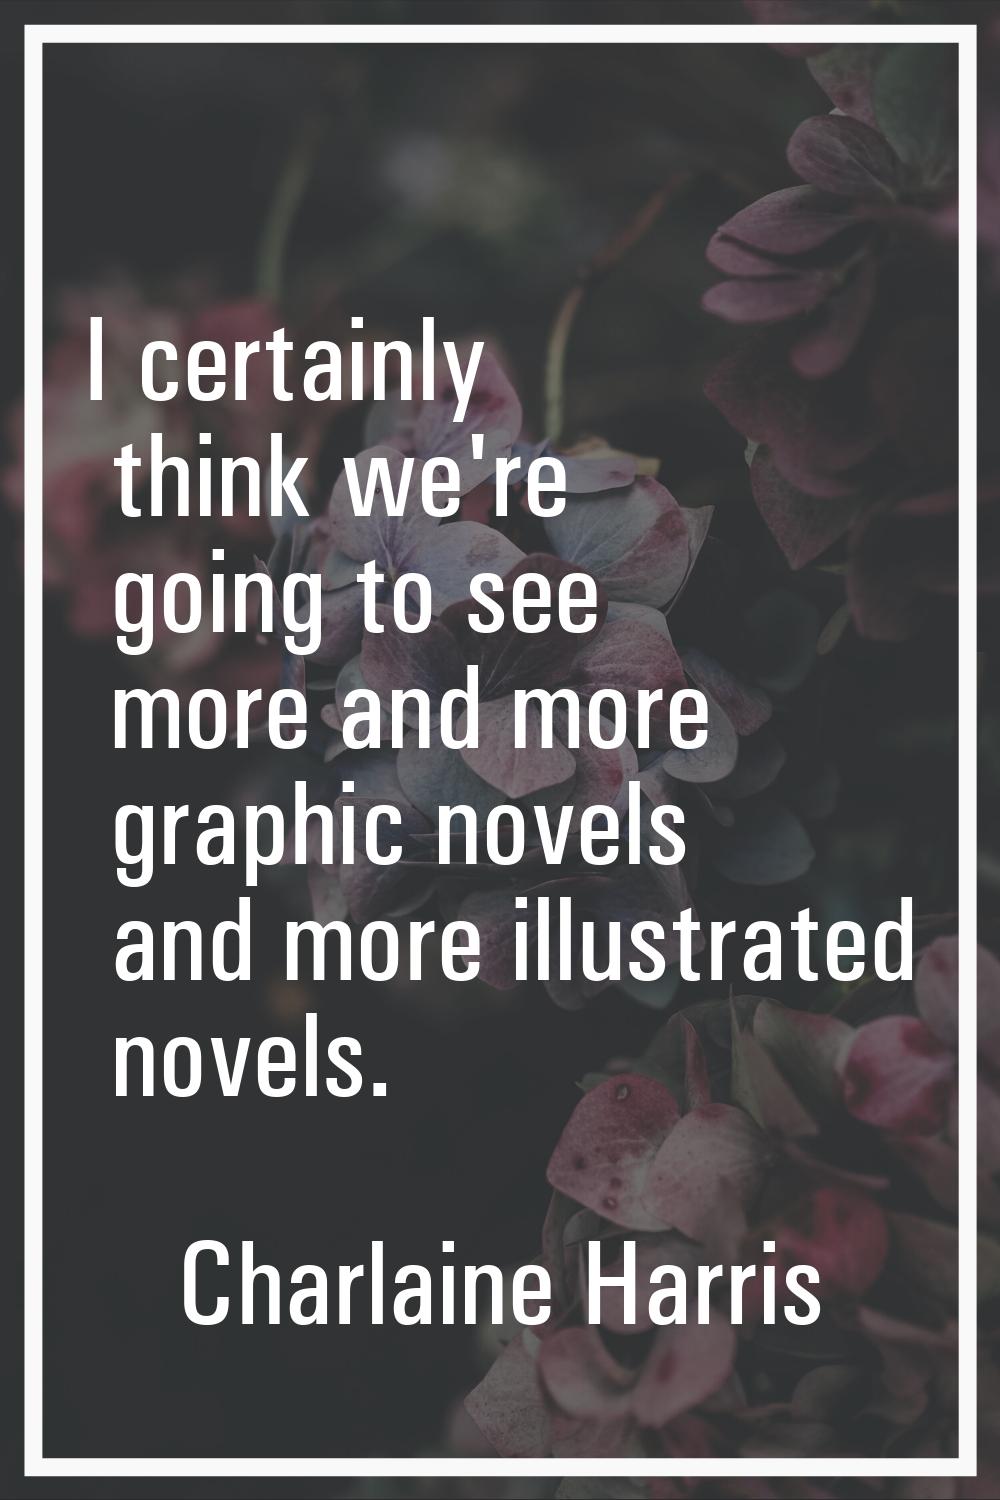 I certainly think we're going to see more and more graphic novels and more illustrated novels.